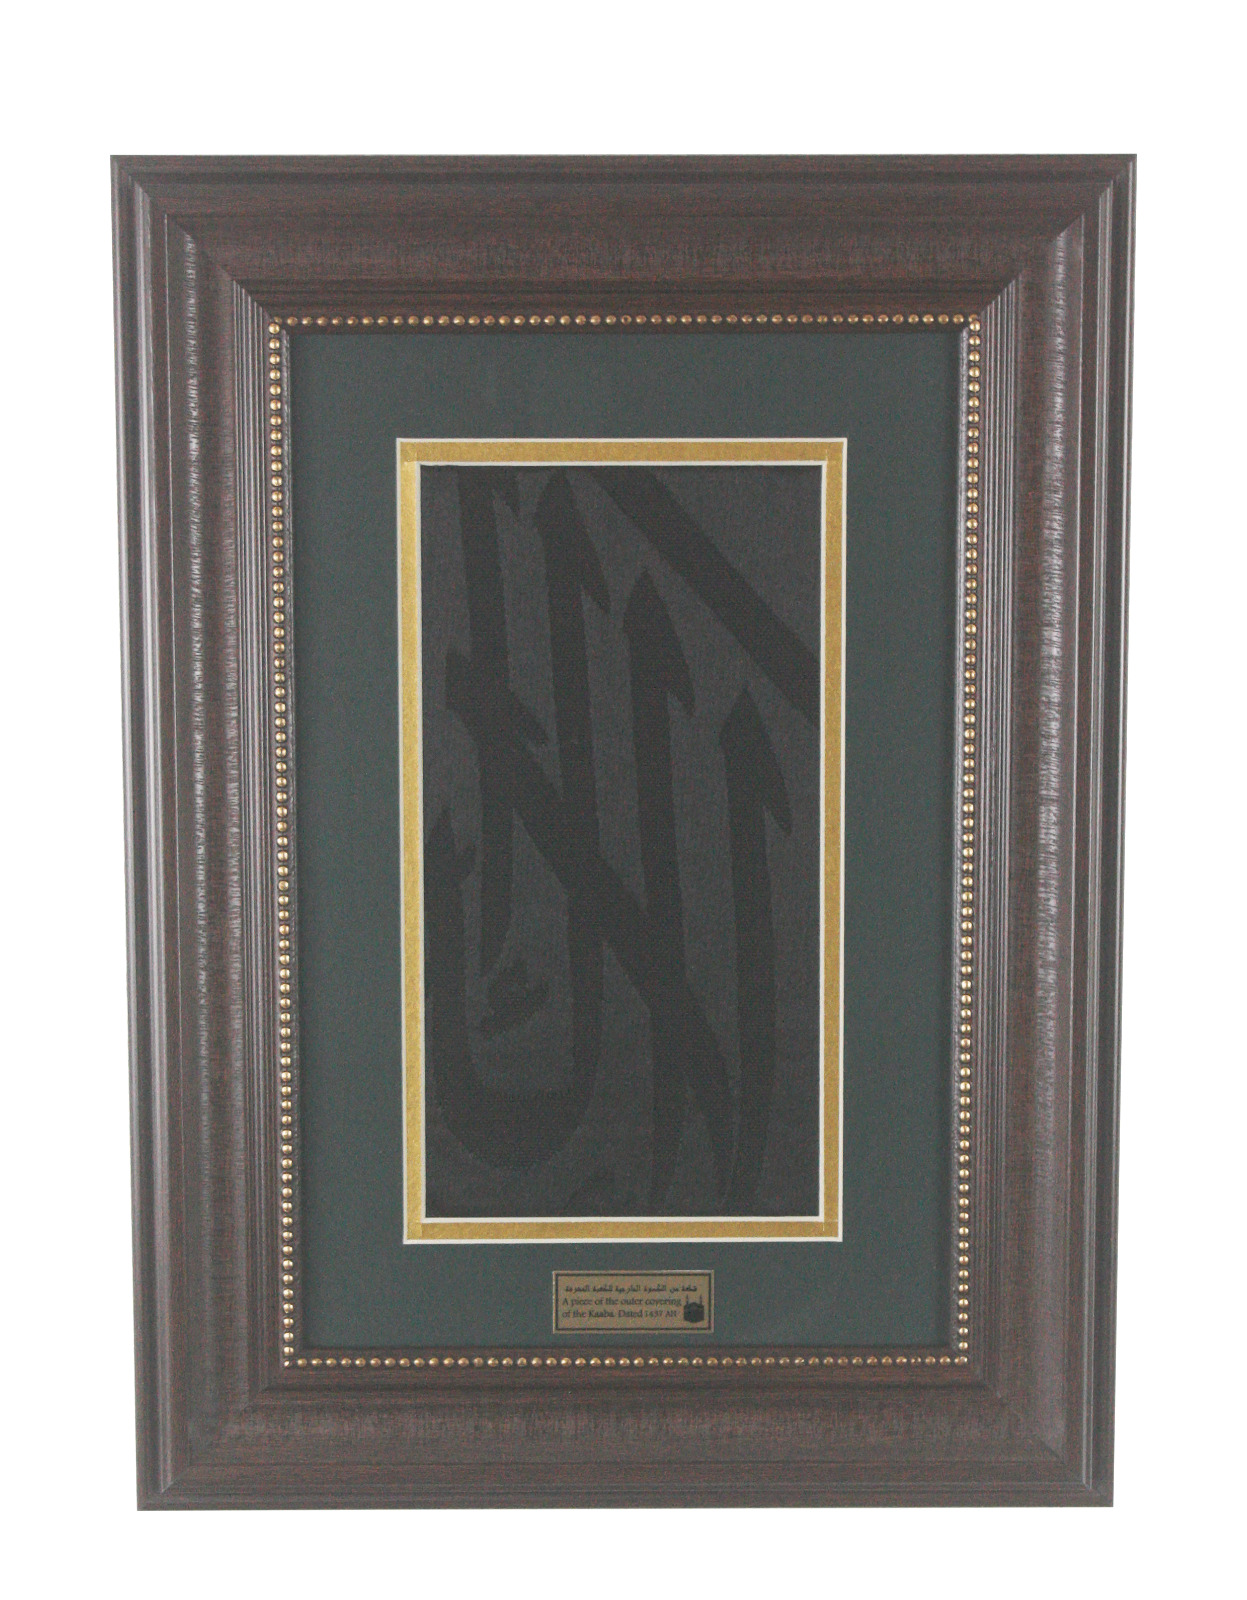 Authentic Holy Kaaba Kiswa Framed and Certified, Eid Gift